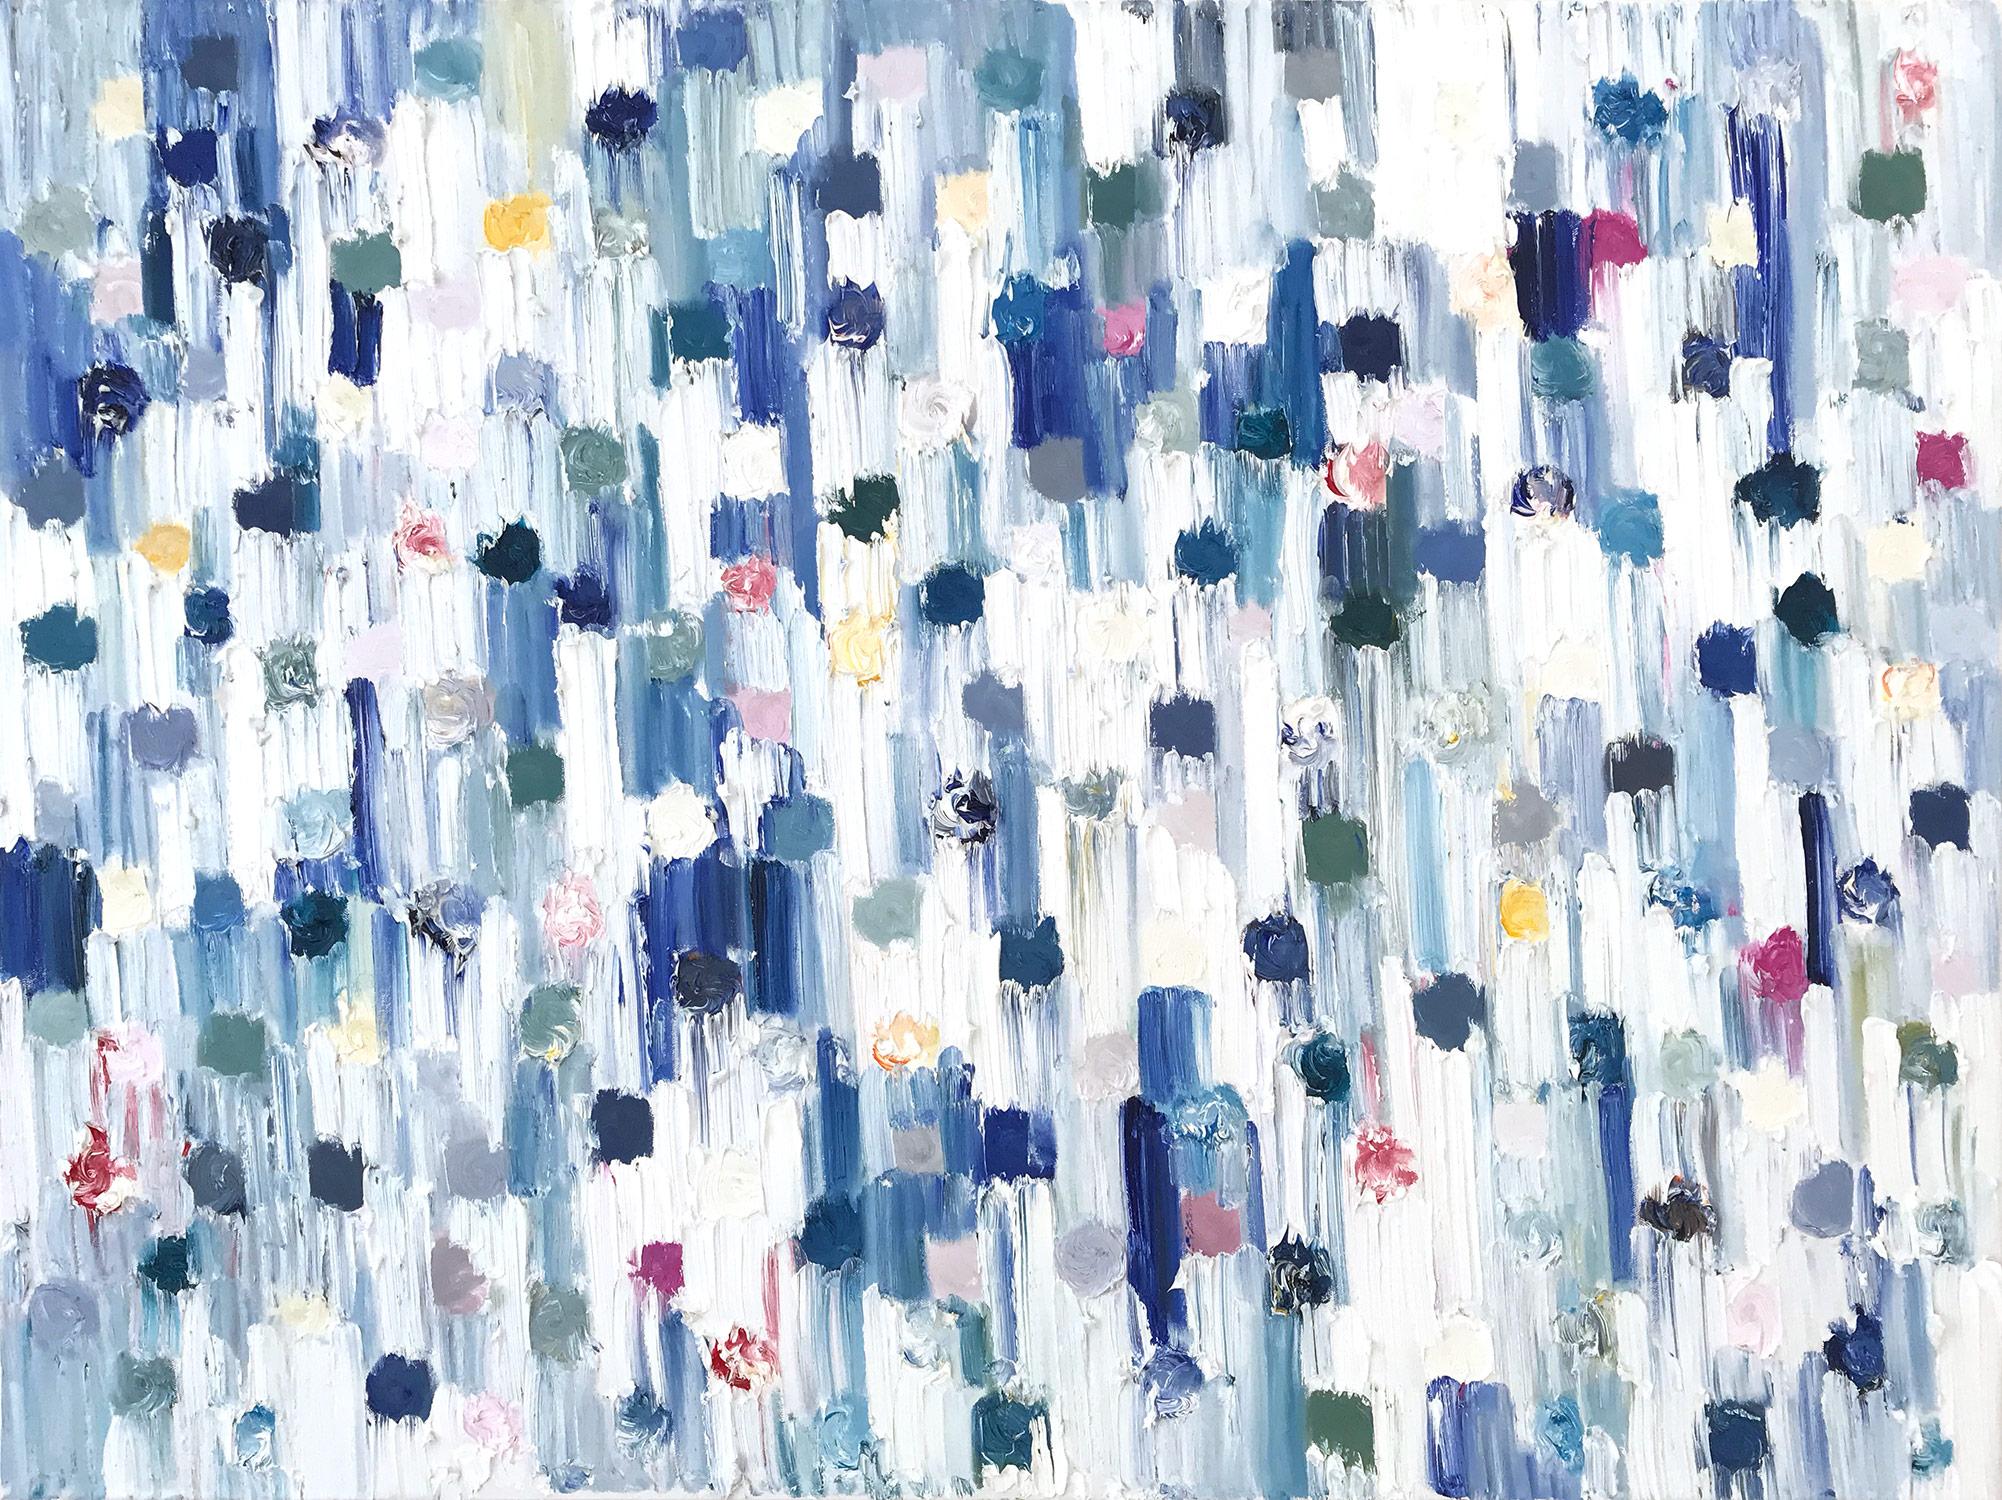 Cindy Shaoul Abstract Painting - "Dripping Dots - Laguna Beach" Colorful Contemporary Abstract Oil Painting